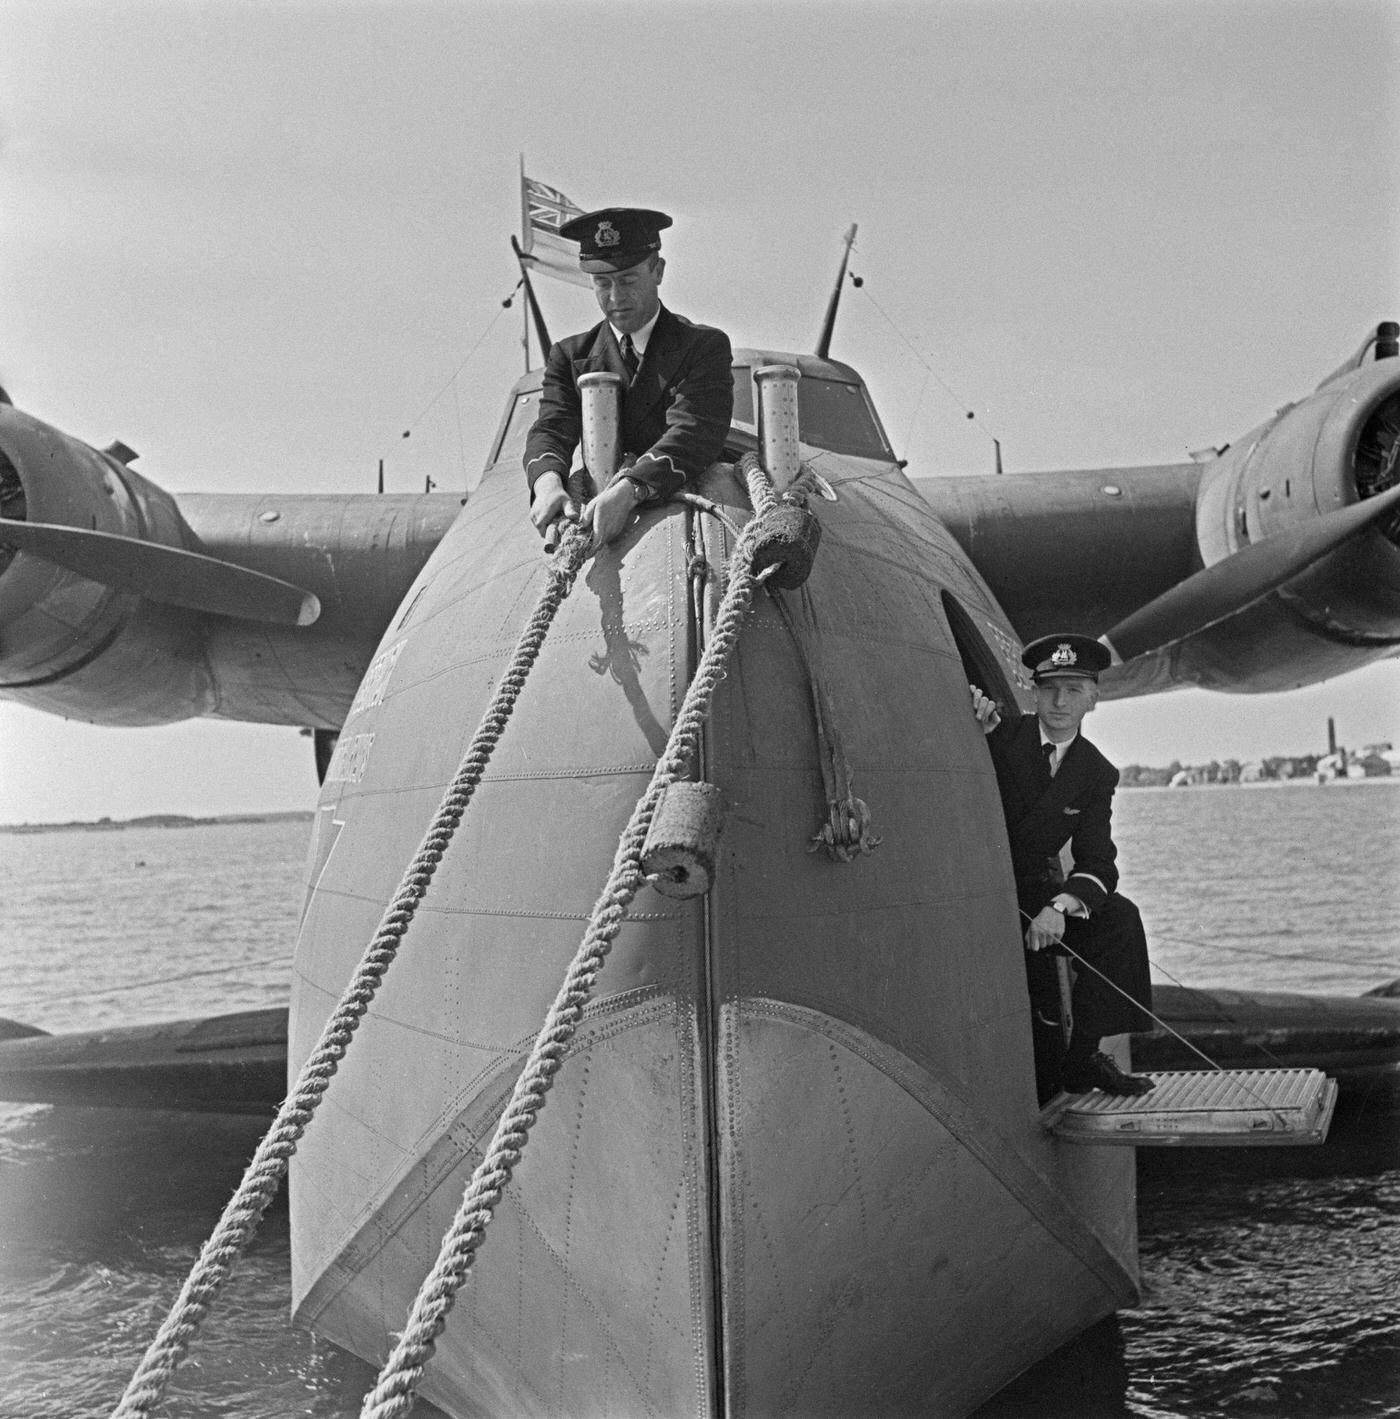 In 1942, two members of the cabin crew are casting off the mooring ropes from the British Overseas Airways Corporation (BOAC) Boeing 314A Clipper flying boat Berwick (registration G-AGCA) prior to an international flight from England.